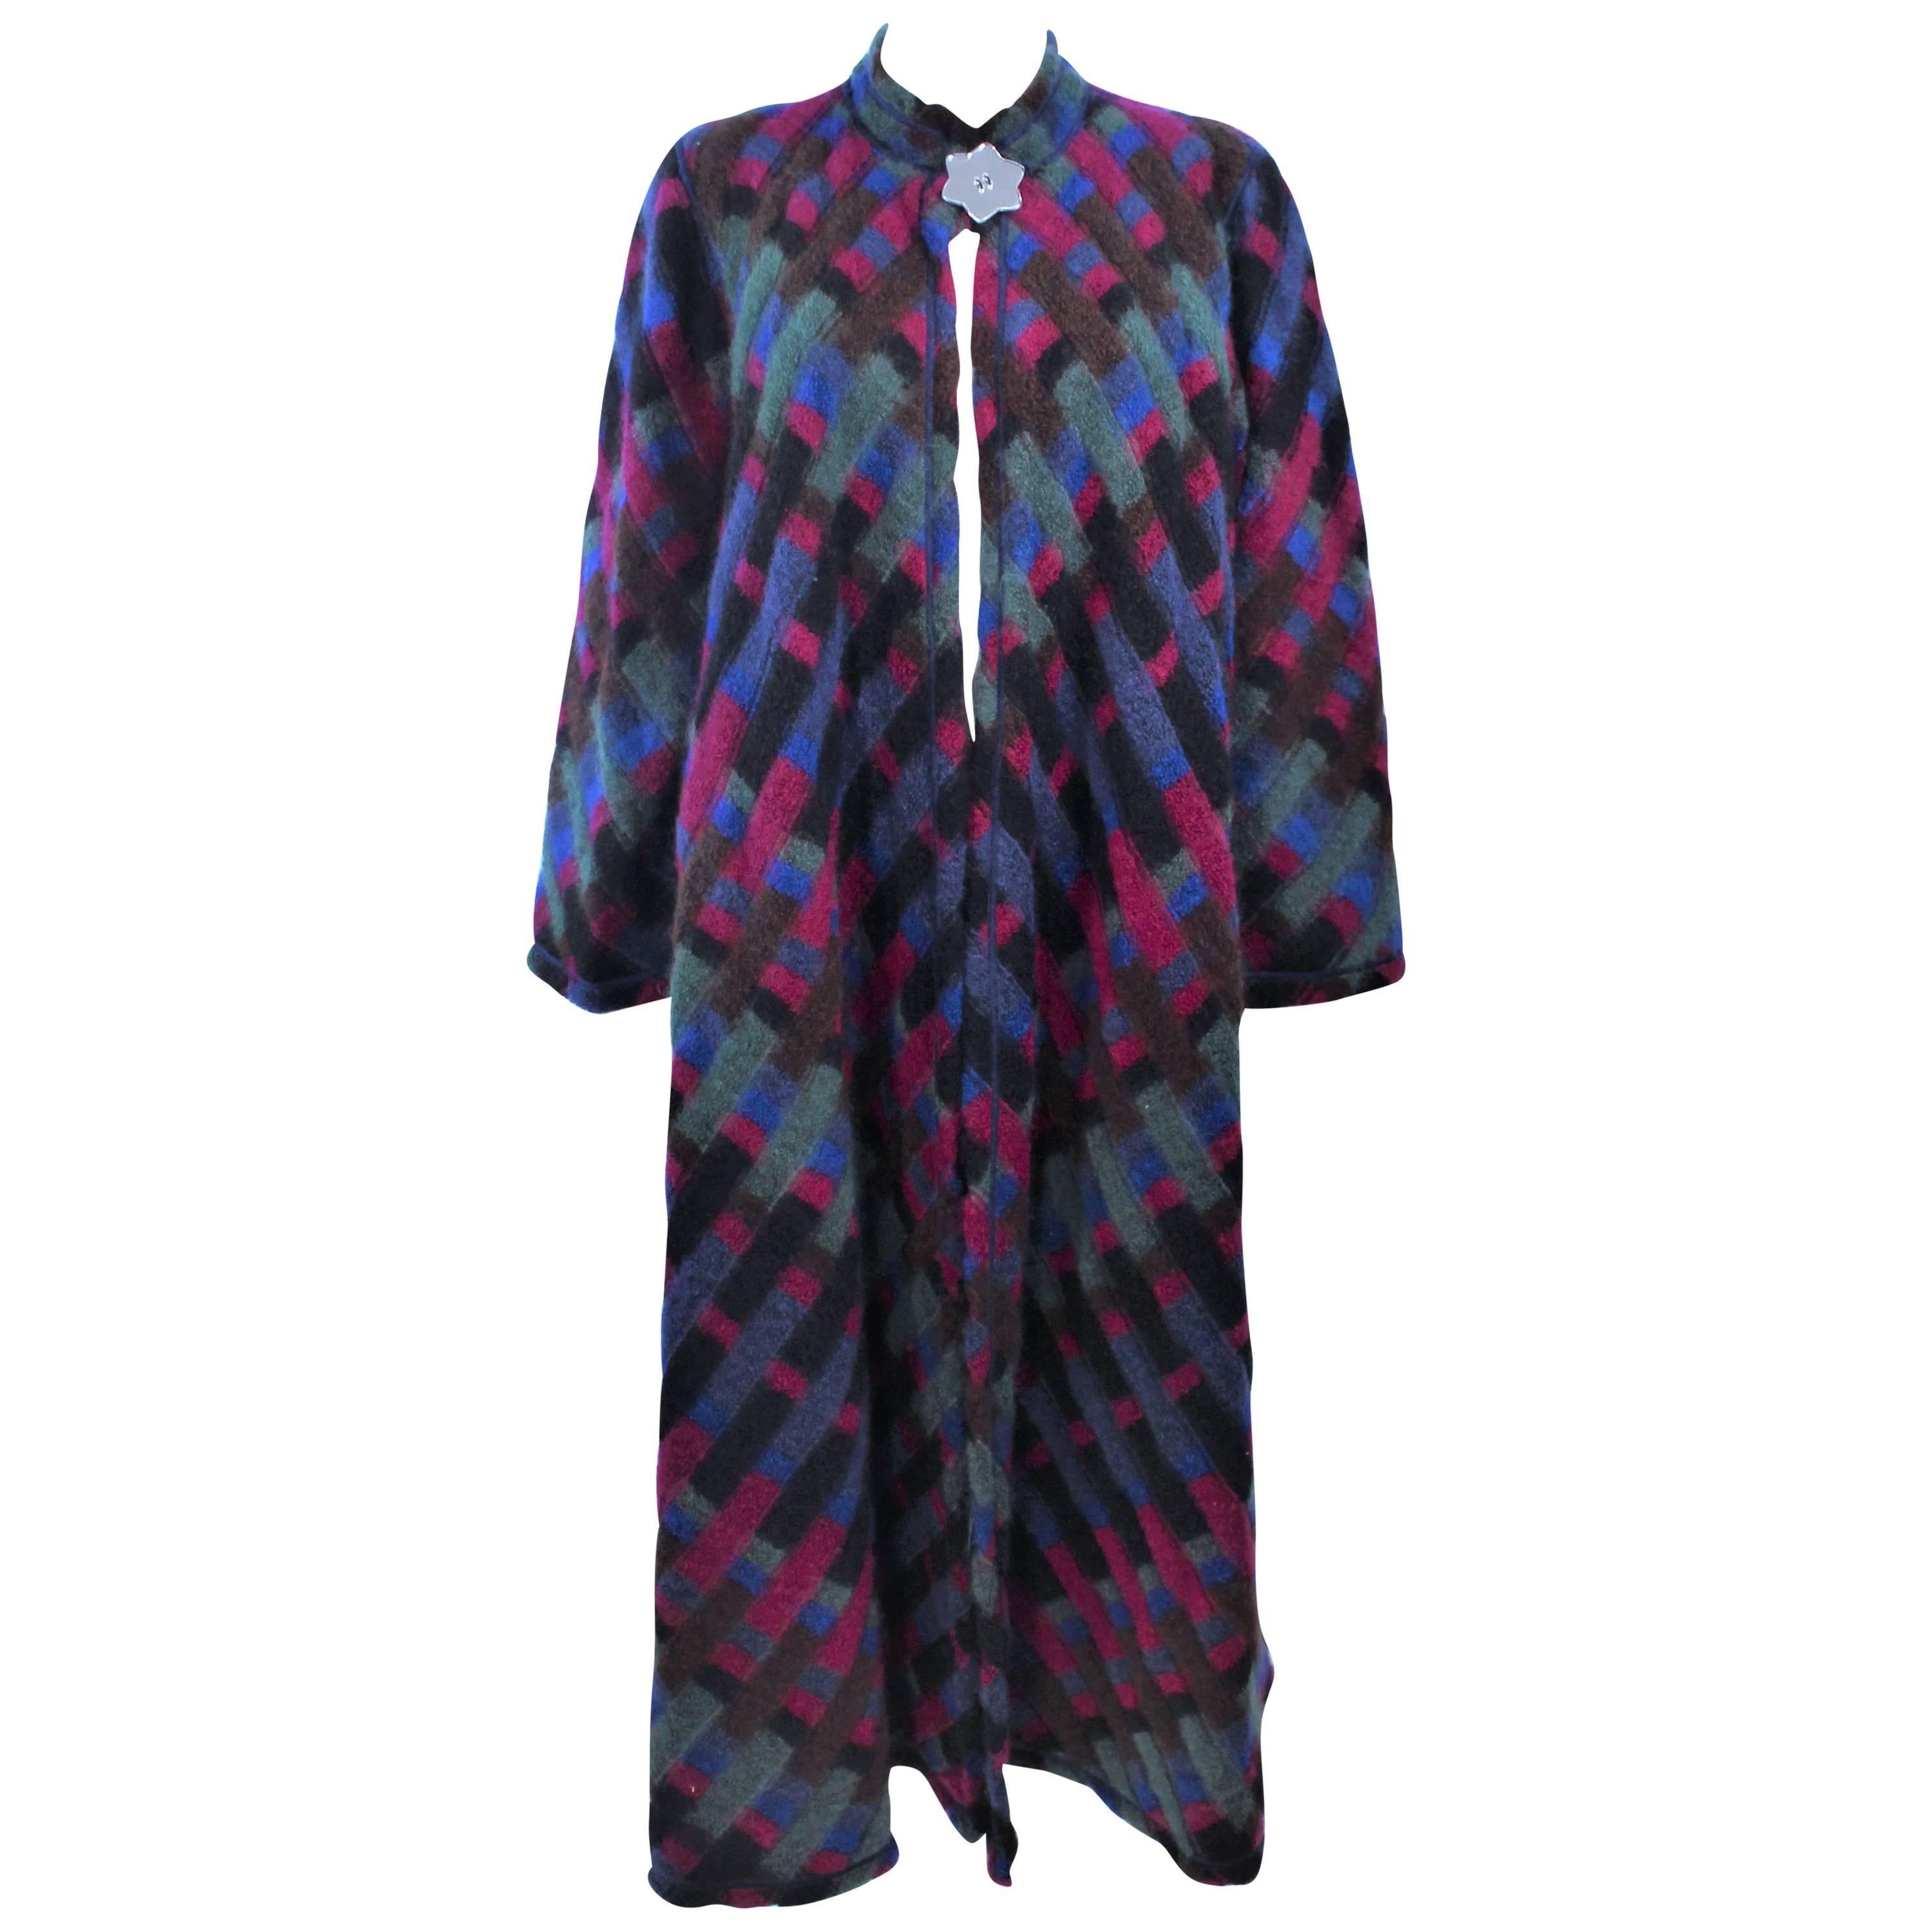 MISSONI Multi- Color Reversible Coat with Mirror Star Button Size 8 For Sale